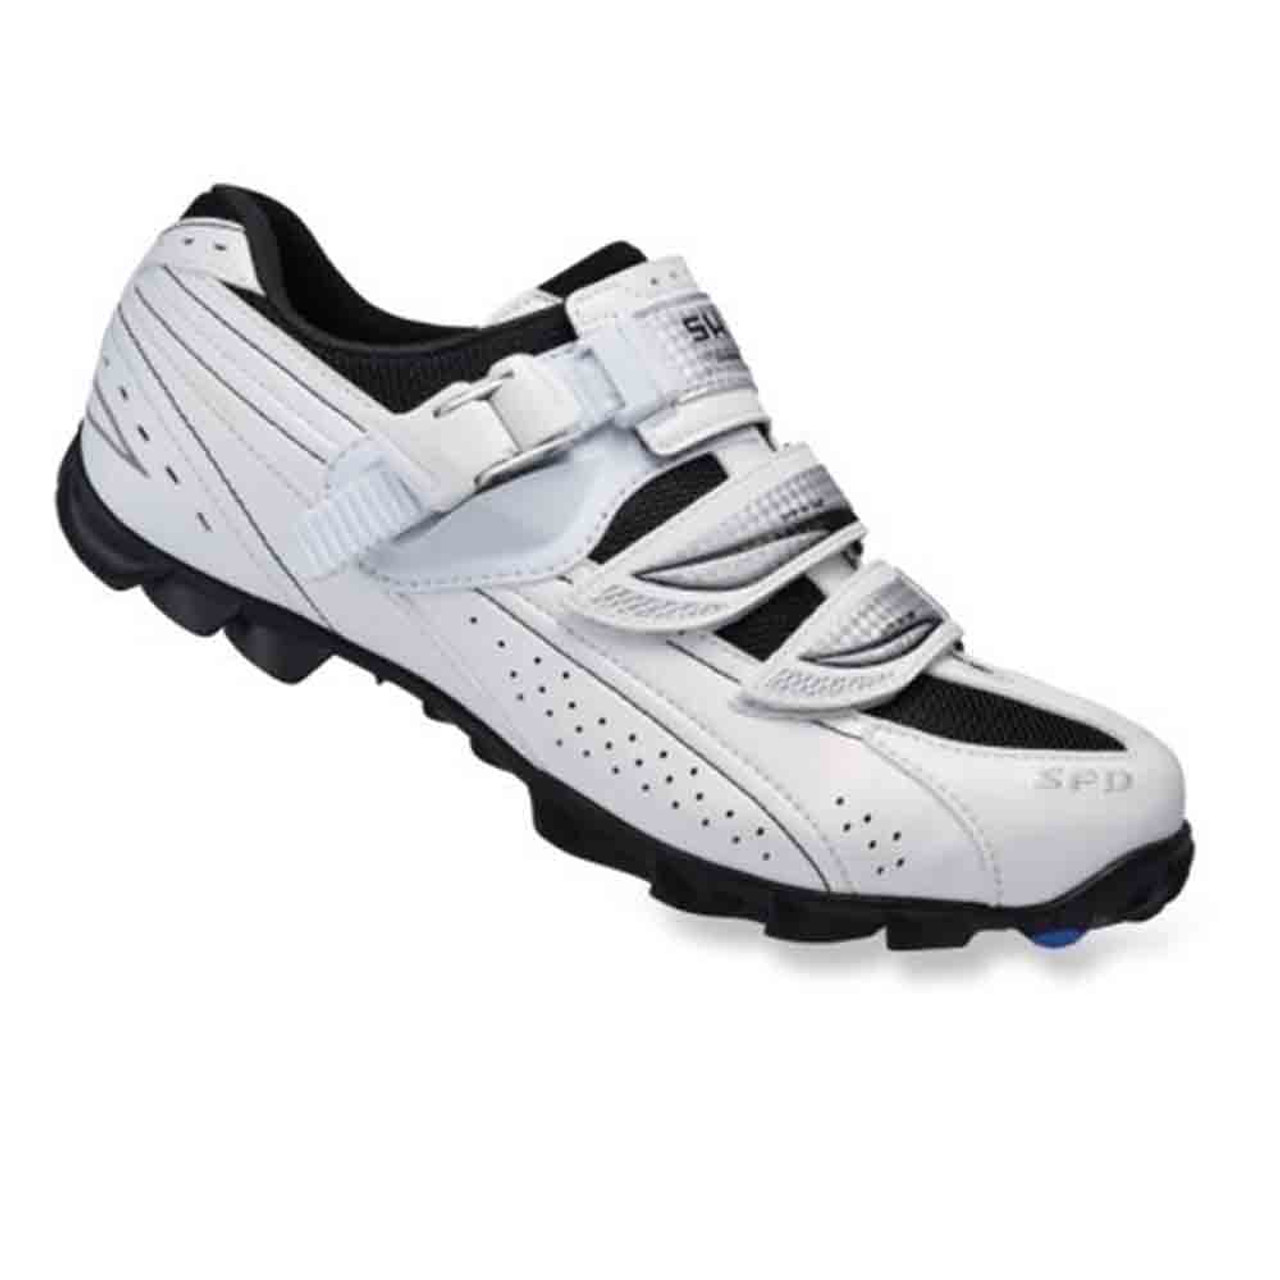 Shimano WM62L Women's cycling shoe brand new SPD or two bolt size 37/5.5 